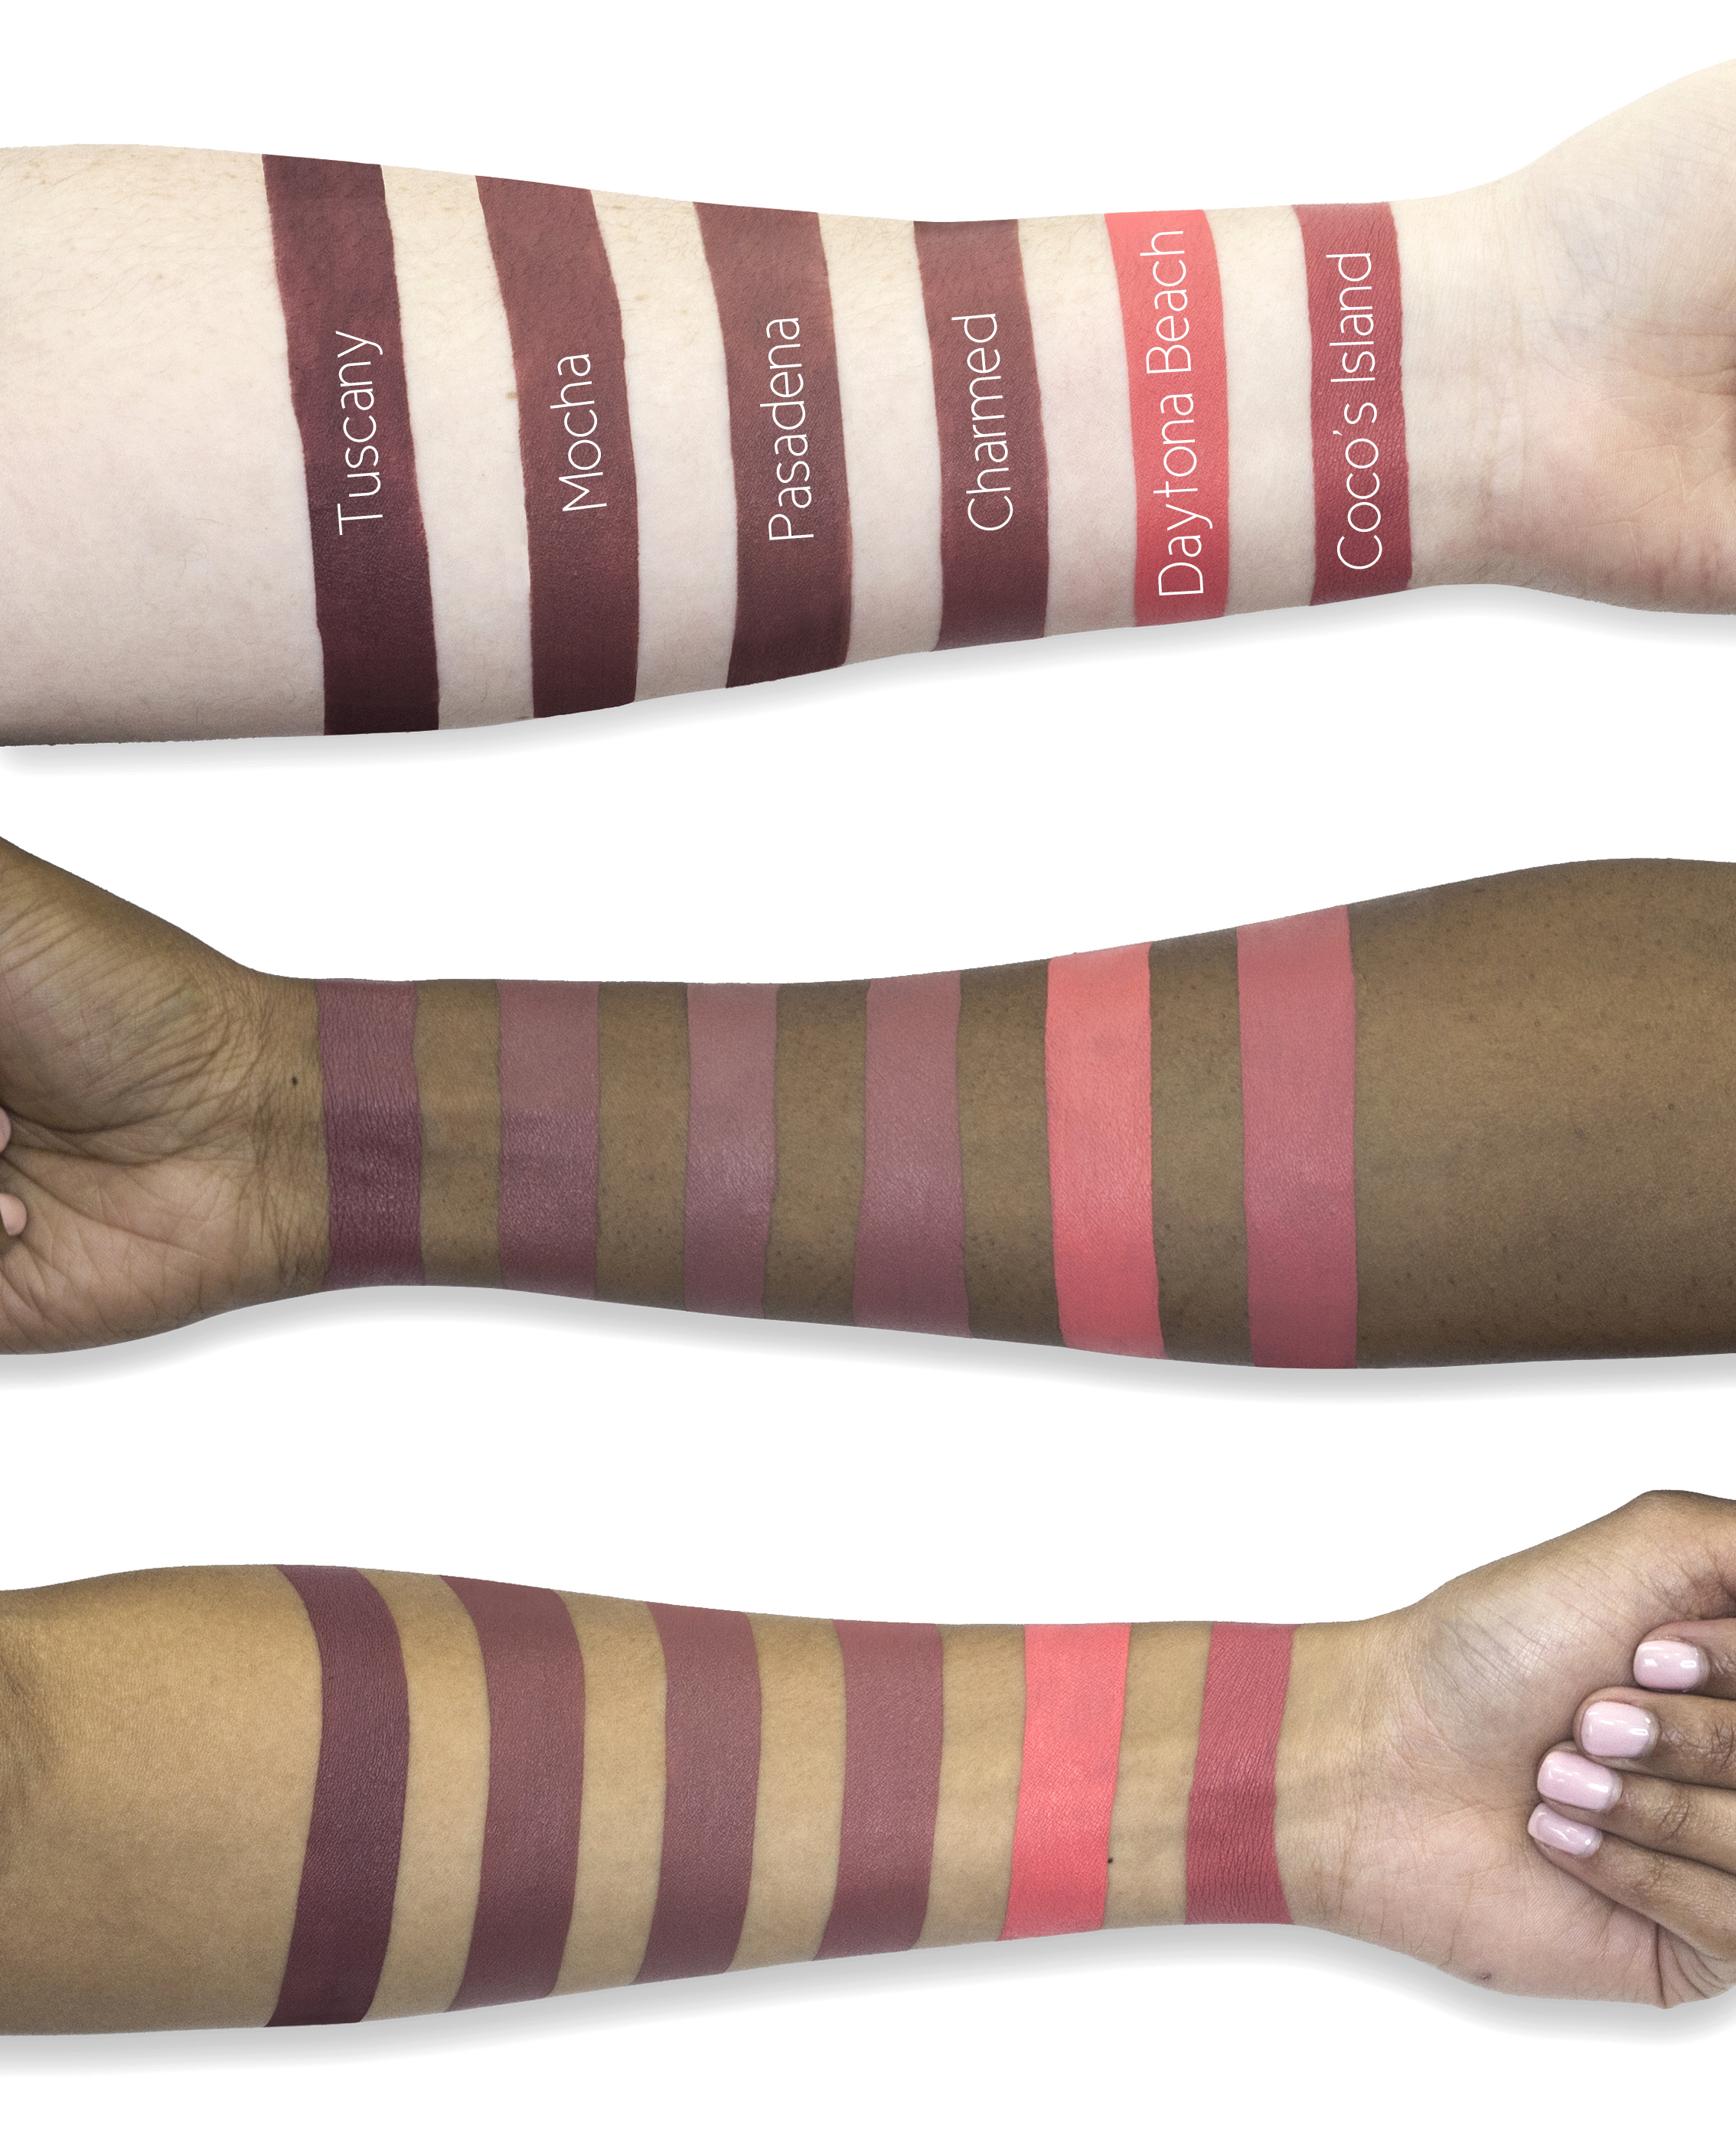 Peaches_and_Nudes2-_SWATCHES_2-with_text-crop_085116ed-9e36-4109-be88-f419218e4033.png